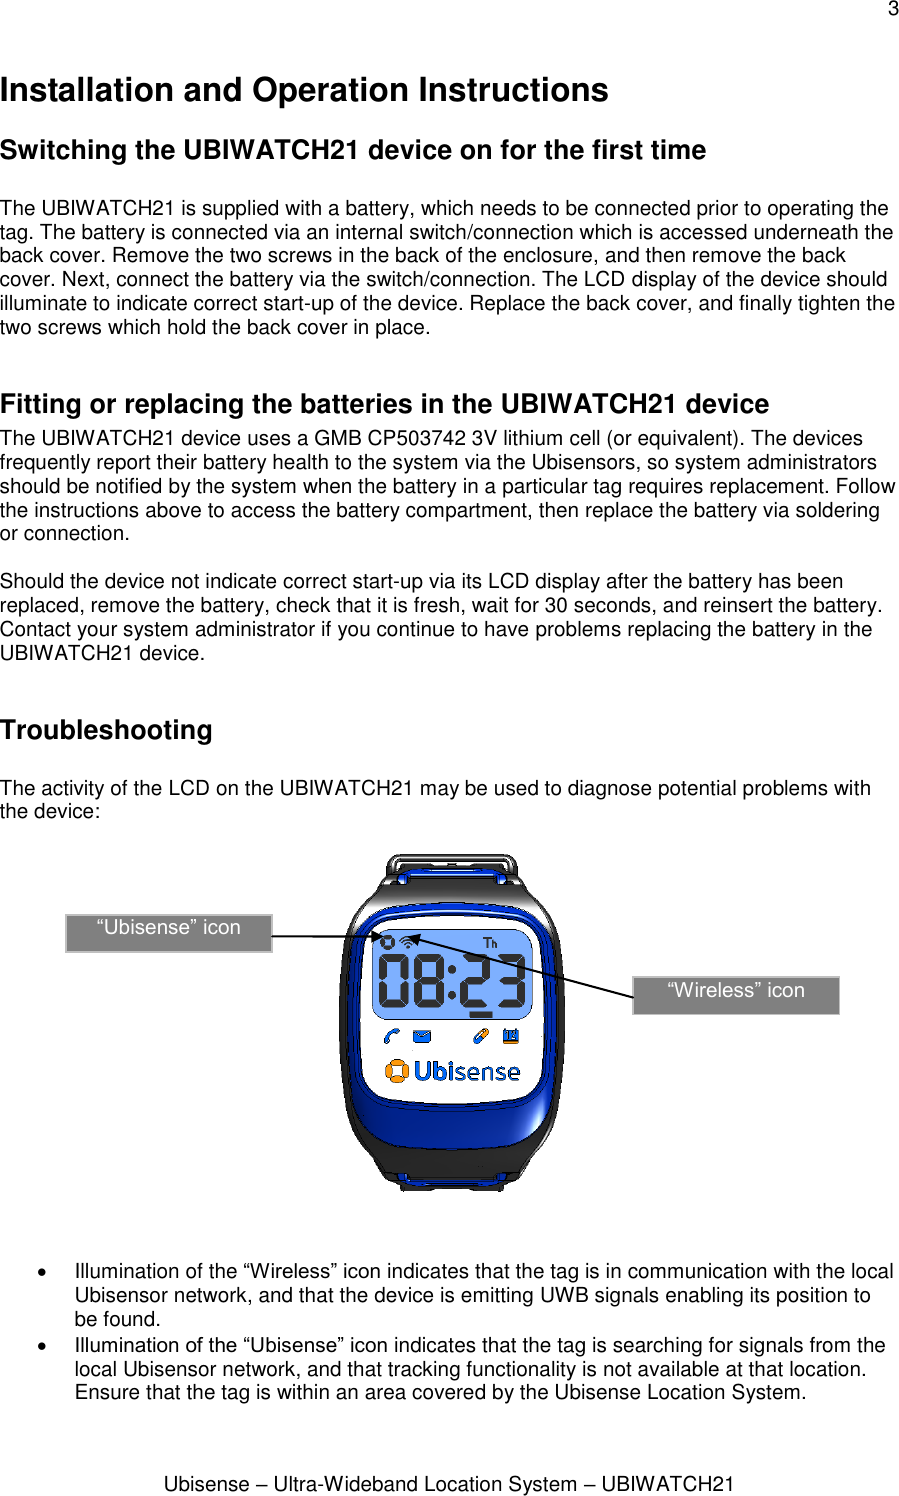 3 Ubisense – Ultra-Wideband Location System – UBIWATCH21 Installation and Operation Instructions Switching the UBIWATCH21 device on for the first time  The UBIWATCH21 is supplied with a battery, which needs to be connected prior to operating the tag. The battery is connected via an internal switch/connection which is accessed underneath the back cover. Remove the two screws in the back of the enclosure, and then remove the back cover. Next, connect the battery via the switch/connection. The LCD display of the device should illuminate to indicate correct start-up of the device. Replace the back cover, and finally tighten the two screws which hold the back cover in place.  Fitting or replacing the batteries in the UBIWATCH21 device The UBIWATCH21 device uses a GMB CP503742 3V lithium cell (or equivalent). The devices frequently report their battery health to the system via the Ubisensors, so system administrators should be notified by the system when the battery in a particular tag requires replacement. Follow the instructions above to access the battery compartment, then replace the battery via soldering or connection.  Should the device not indicate correct start-up via its LCD display after the battery has been replaced, remove the battery, check that it is fresh, wait for 30 seconds, and reinsert the battery. Contact your system administrator if you continue to have problems replacing the battery in the UBIWATCH21 device.  Troubleshooting  The activity of the LCD on the UBIWATCH21 may be used to diagnose potential problems with the device:       Illumination of the “Wireless” icon indicates that the tag is in communication with the local Ubisensor network, and that the device is emitting UWB signals enabling its position to be found.   Illumination of the “Ubisense” icon indicates that the tag is searching for signals from the local Ubisensor network, and that tracking functionality is not available at that location. Ensure that the tag is within an area covered by the Ubisense Location System. “Ubisense” icon “Wireless” icon 